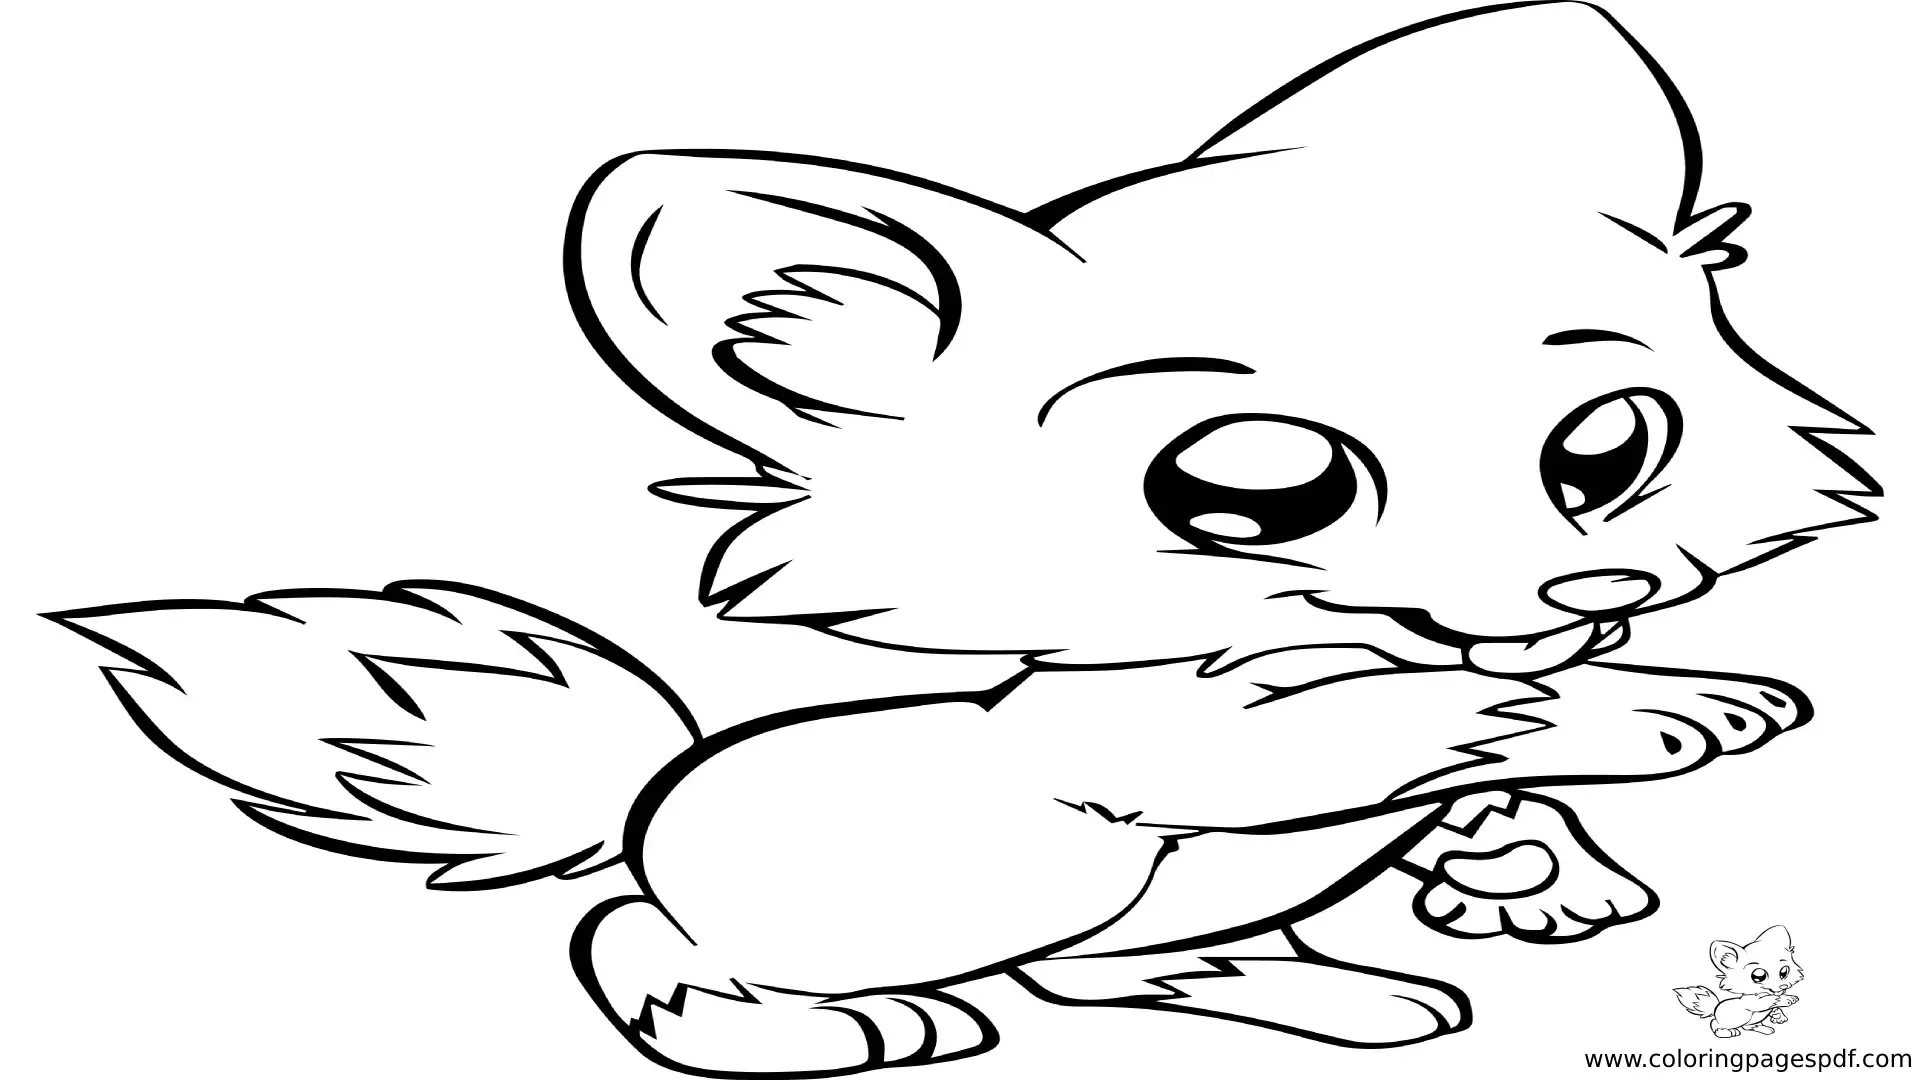 Coloring Pages Of A Baby Fox Licking Its Paw